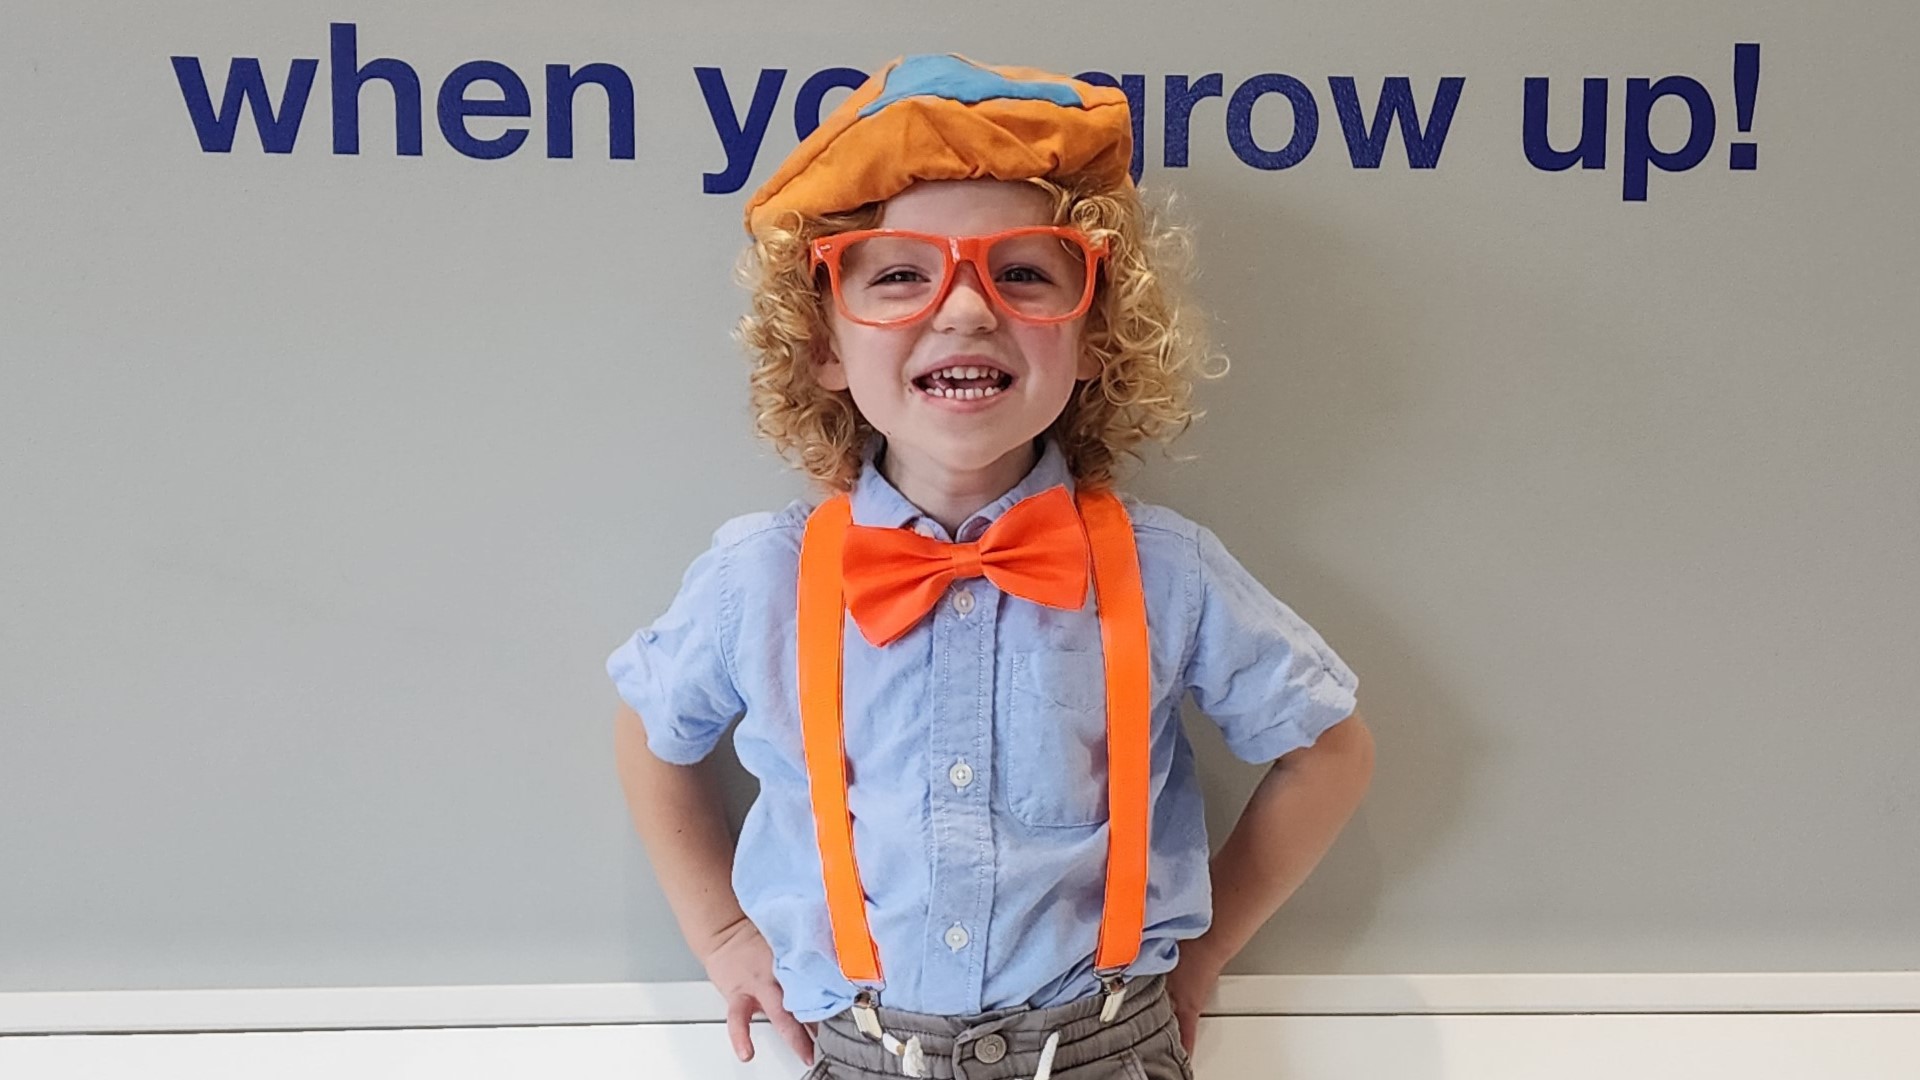 We had a costume party we attended and so the babies went as blippi an